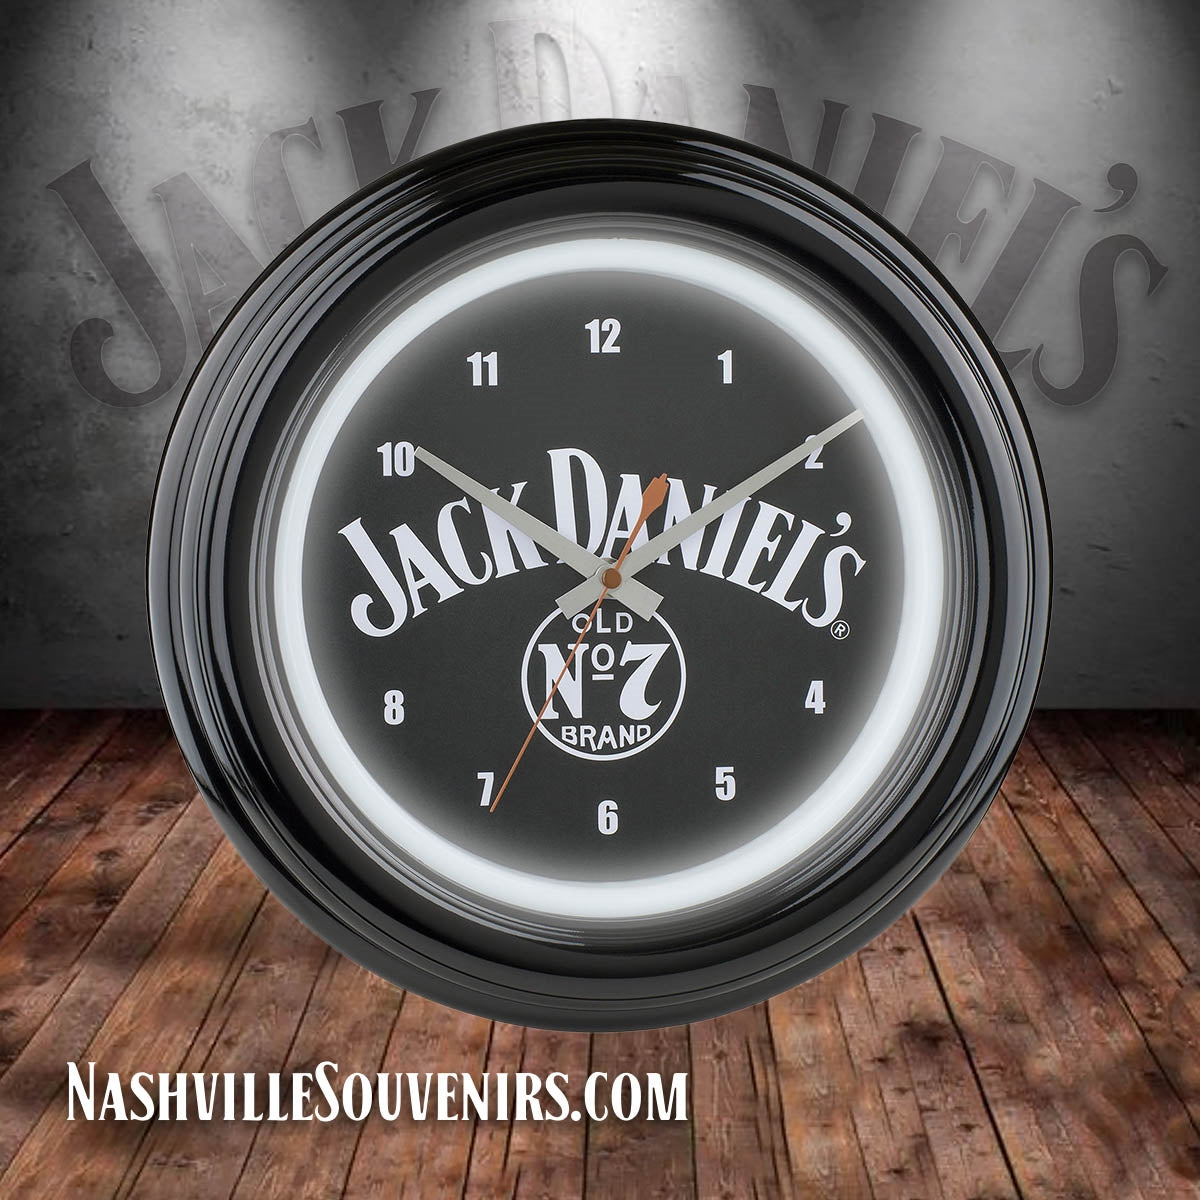 You'll always know when it's time for some Tennessee whiskey when this Jack Daniel's LED clock is on the wall of your home bar. This Jack Daniel's clock is one of the fun and functional man cave wall ideas we offer.